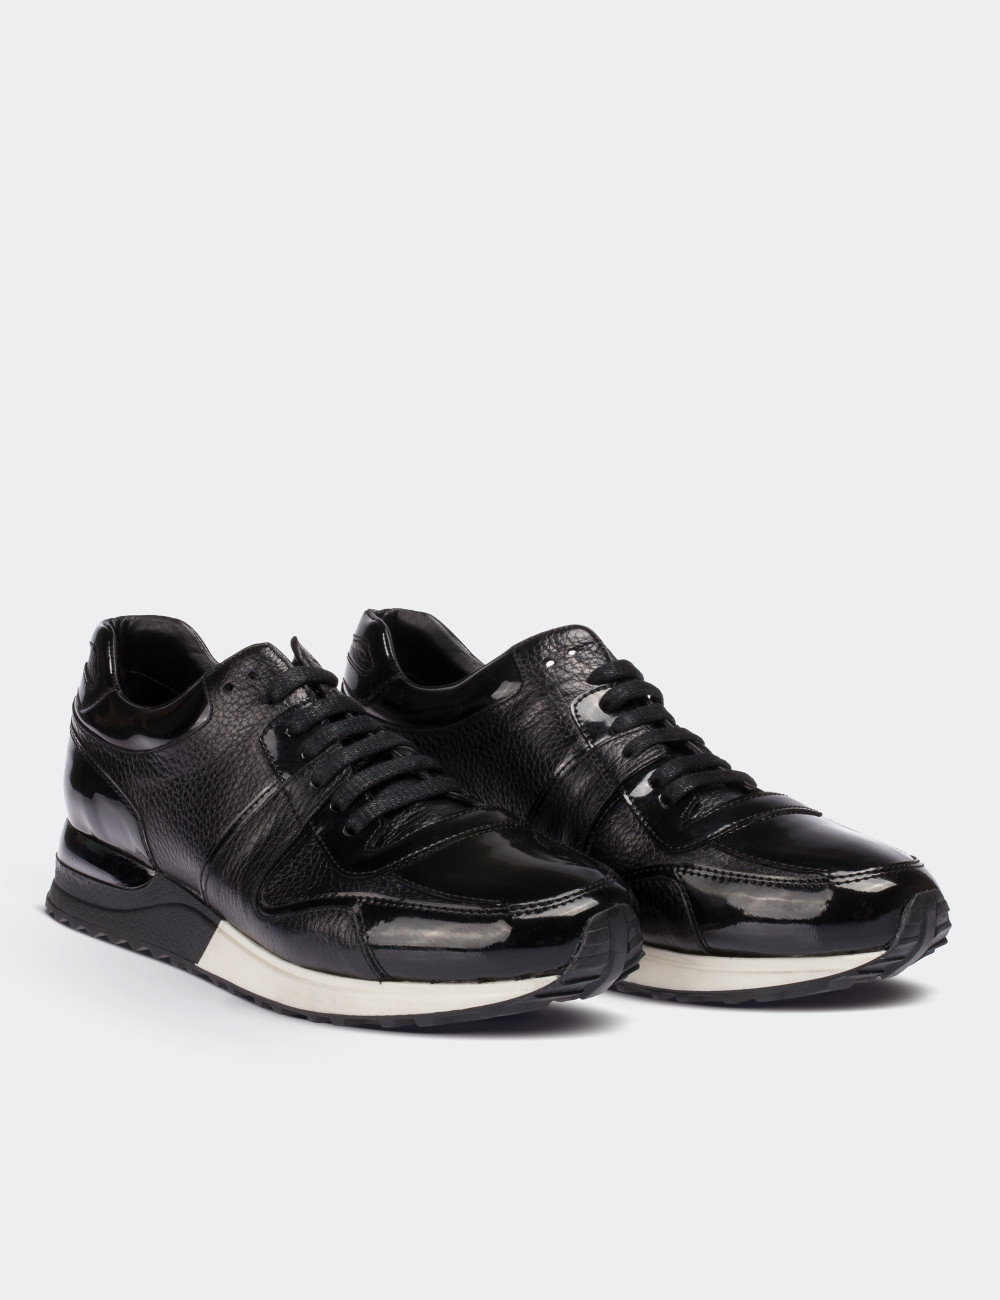 Black Patent Leather Sneakers - 01522ZSYHT02